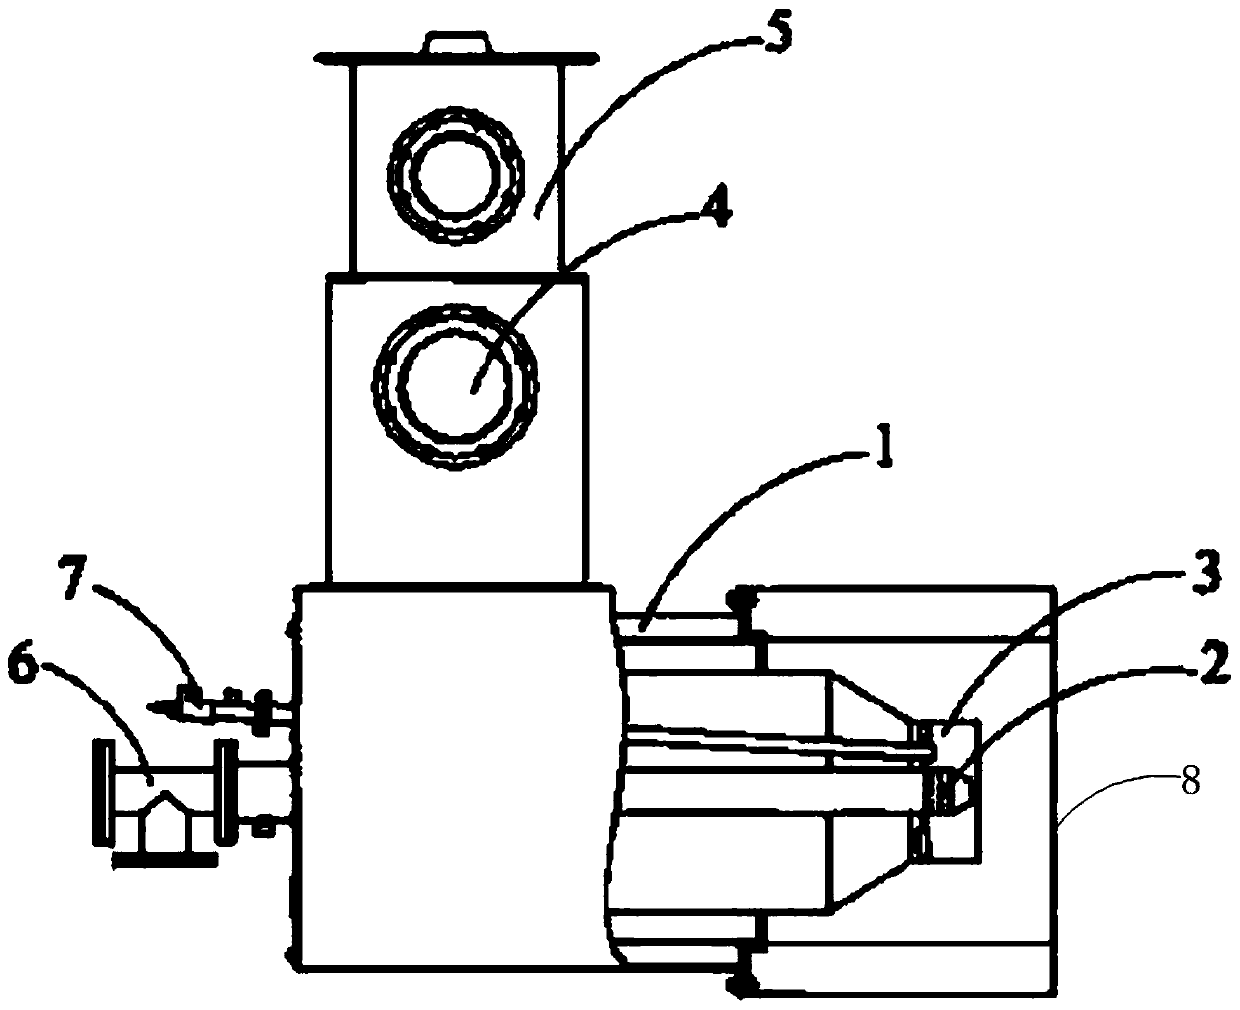 Production device for industrial kiln